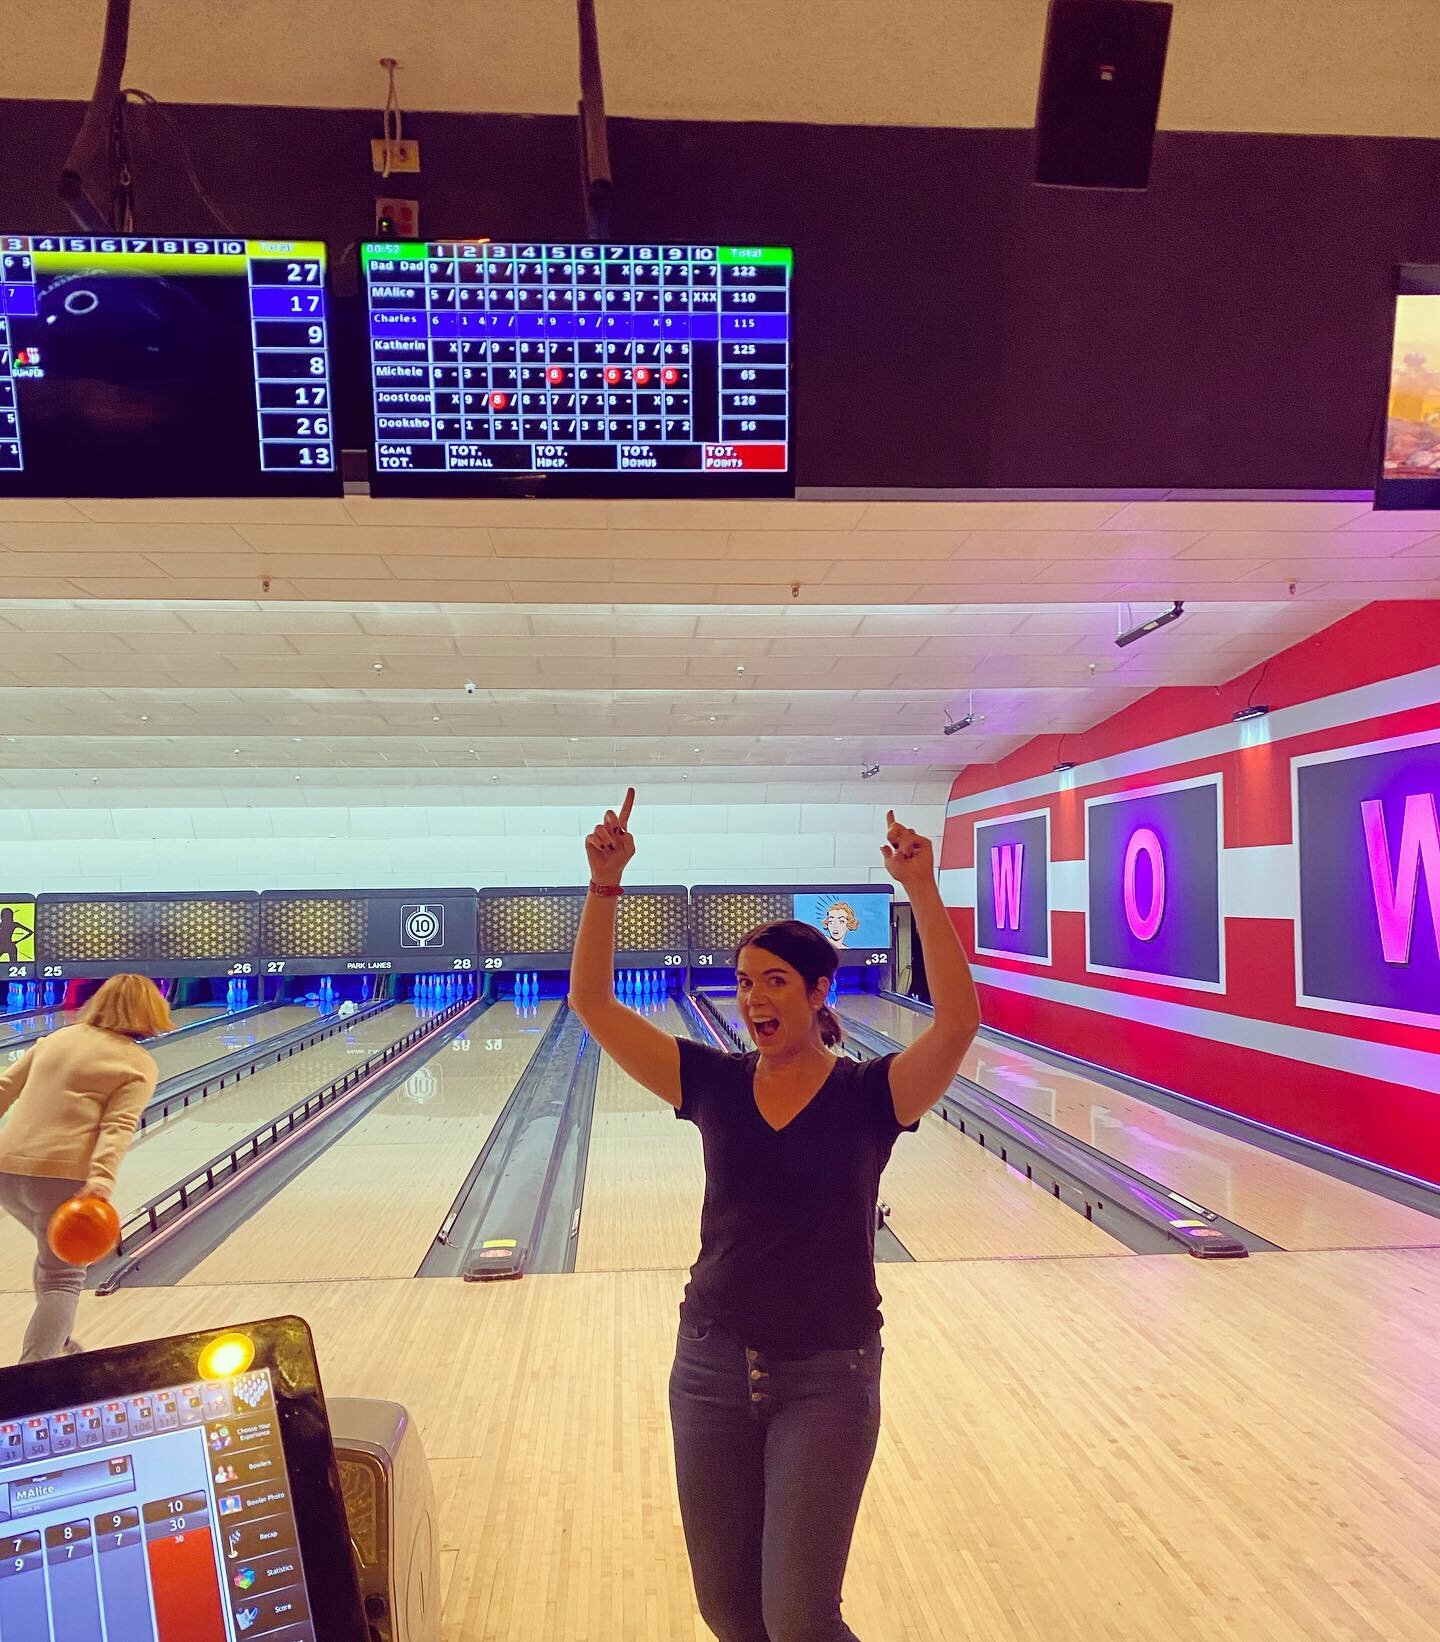 (Almost) 39 and my bowling skills could best be described as &ldquo;&hellip;basically fine 🤷🏻&zwj;♀️ &ldquo;  But here&rsquo;s a pic of me getting a turkey at my bday party - I am nothing if not seasonally apropos. #gobblegobble